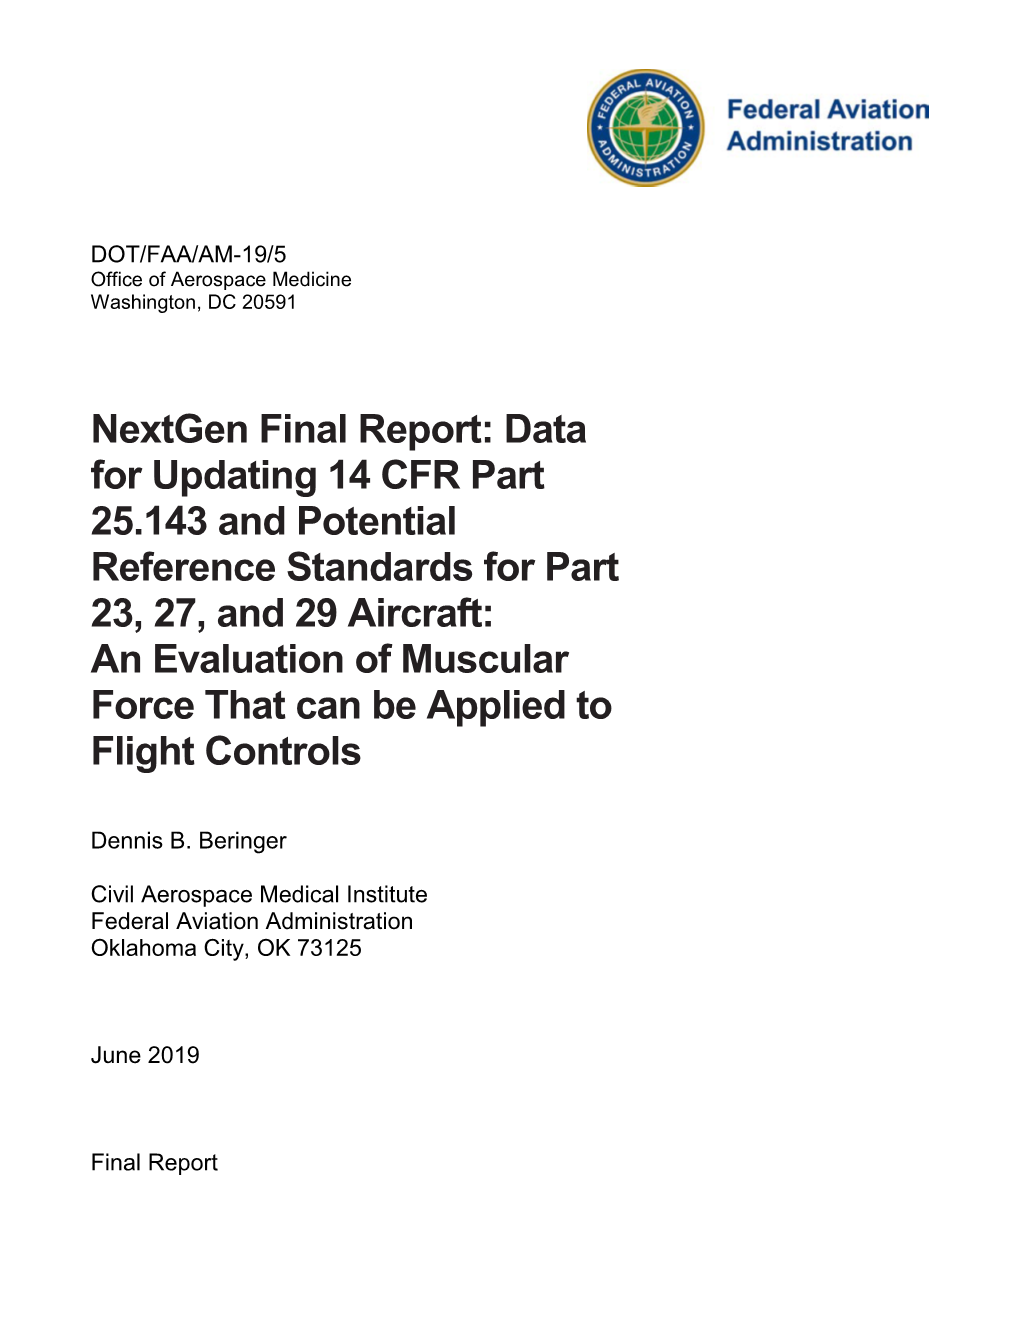 Nextgen Final Report: Data for Updating 14 CFR Part 25.143 and Potential Reference Standards for Part 23, 27, and 29 Aircraft: A